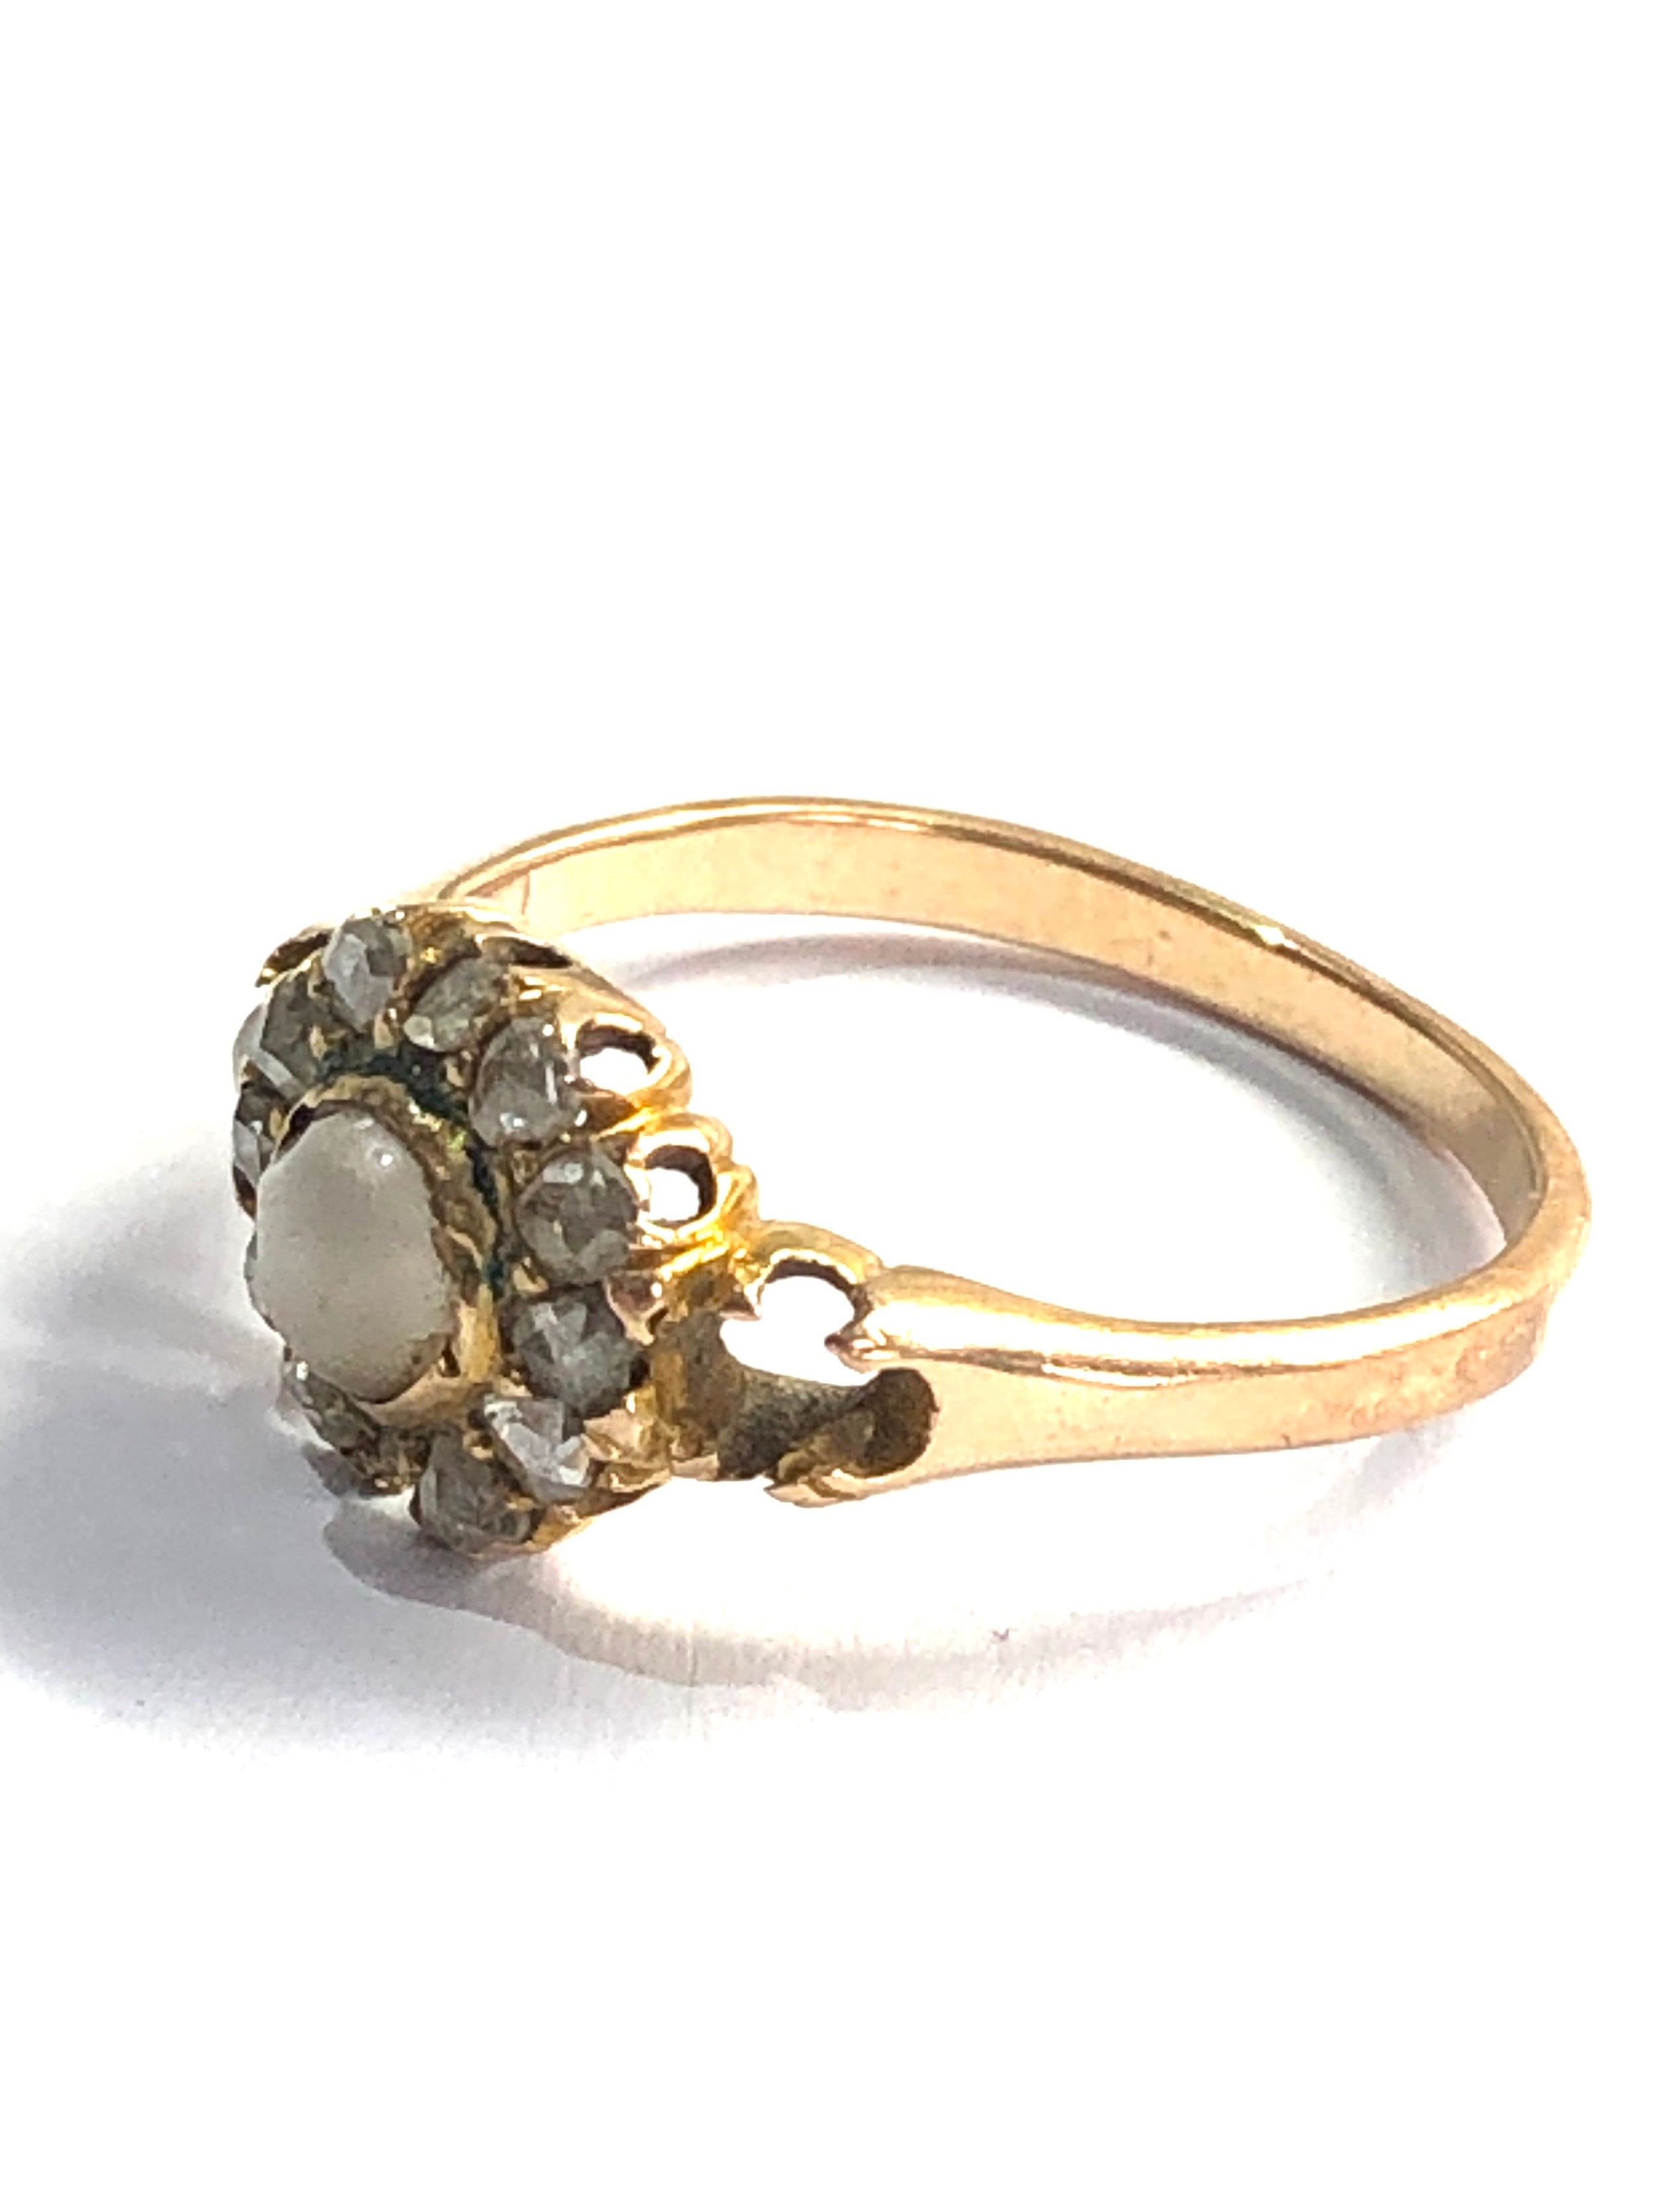 15ct gold antique pearl & rose cut diamonds ring missing stones as shown in images (2.8g) - Image 2 of 5